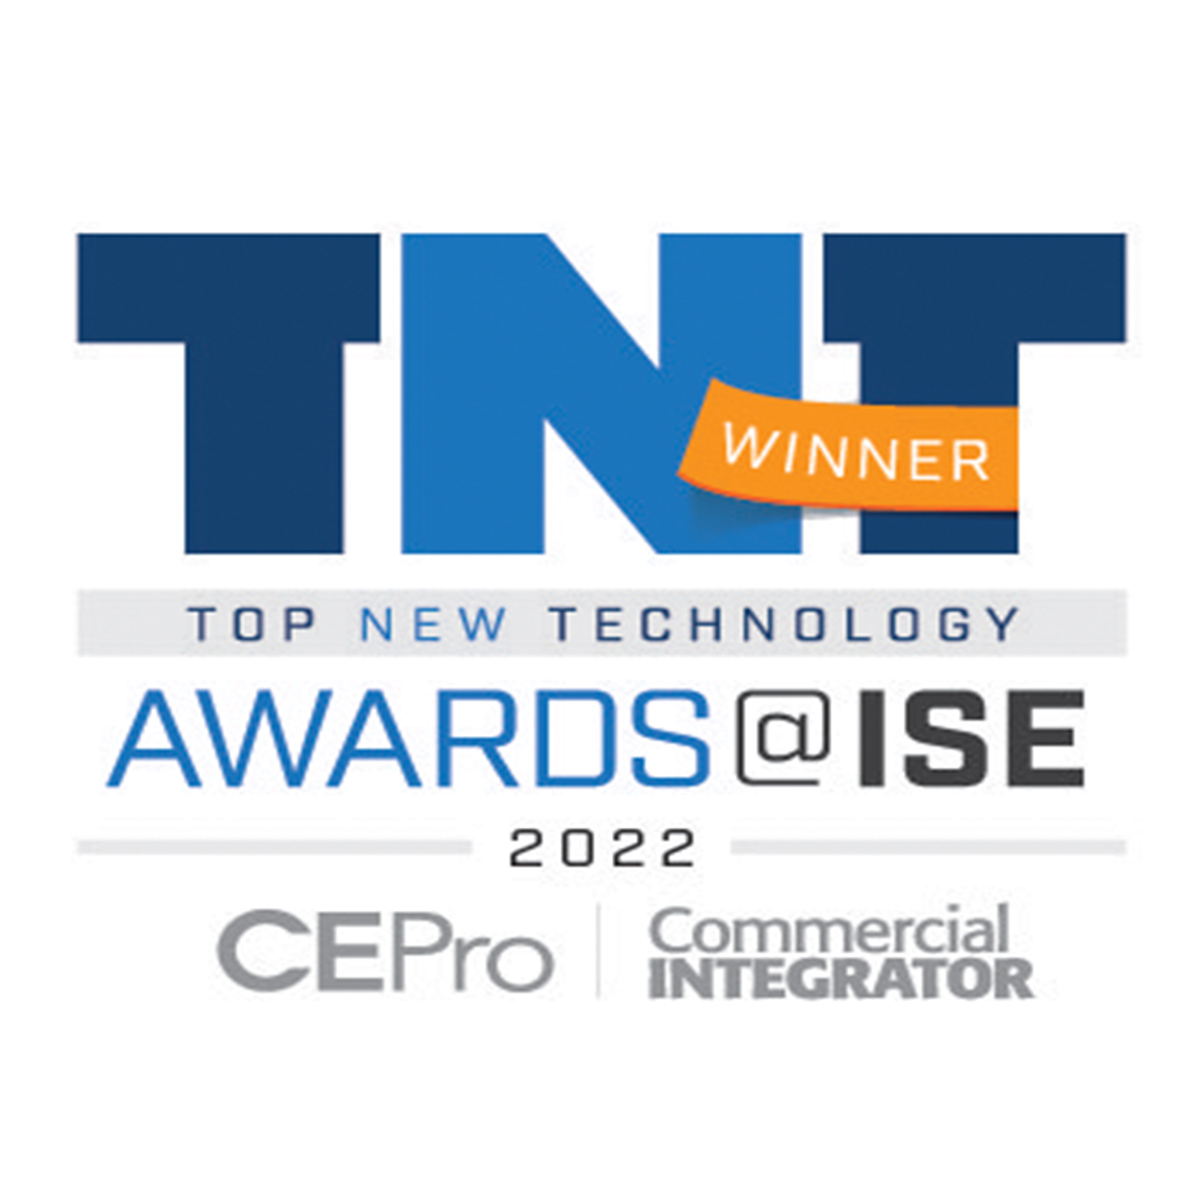 Commercial Integrator and CE Pro Top New Technology Awards